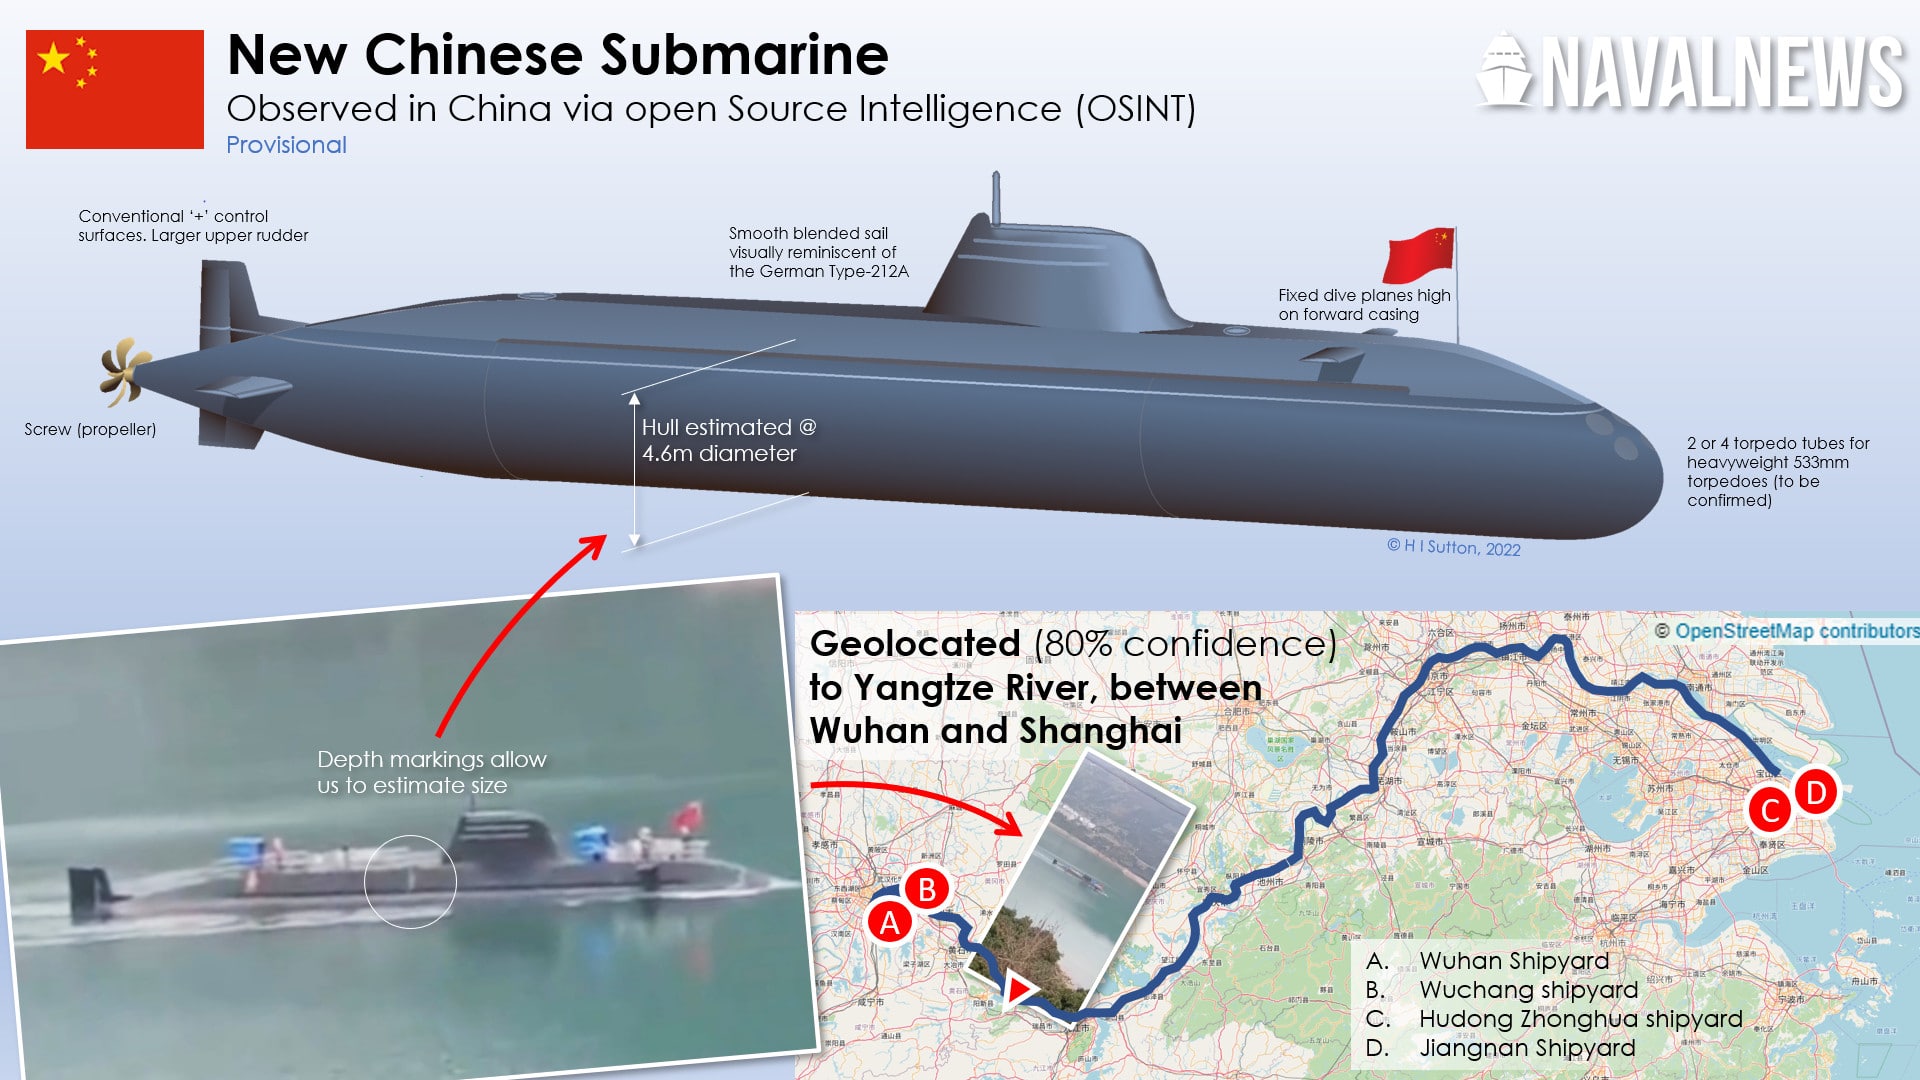 China's New Submarine Is Unlike Anything In Western Navies - Naval News